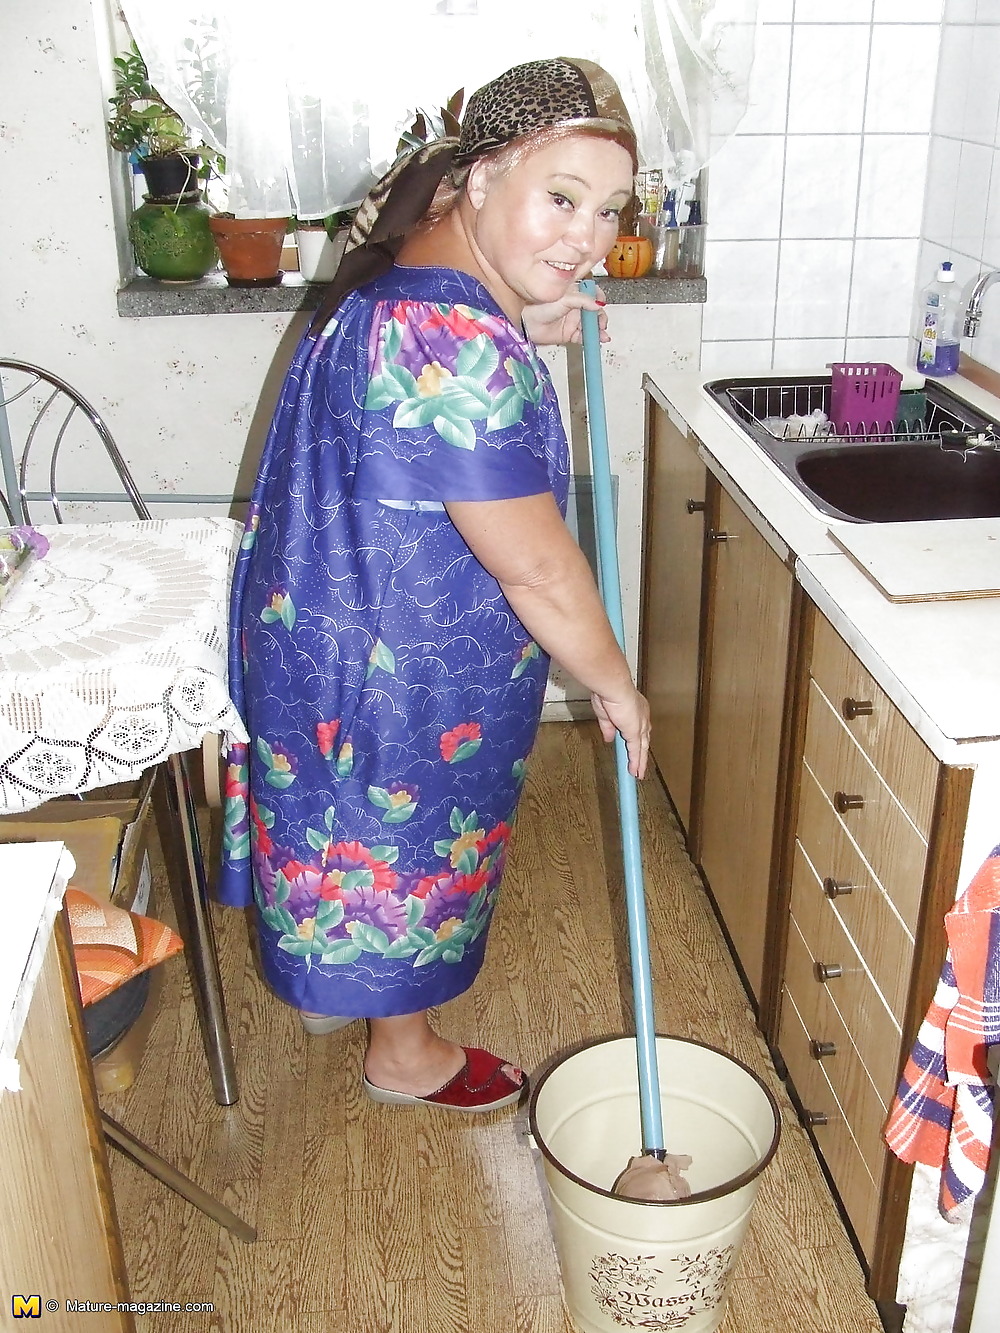 Mature cleaning lady 2 #1151096